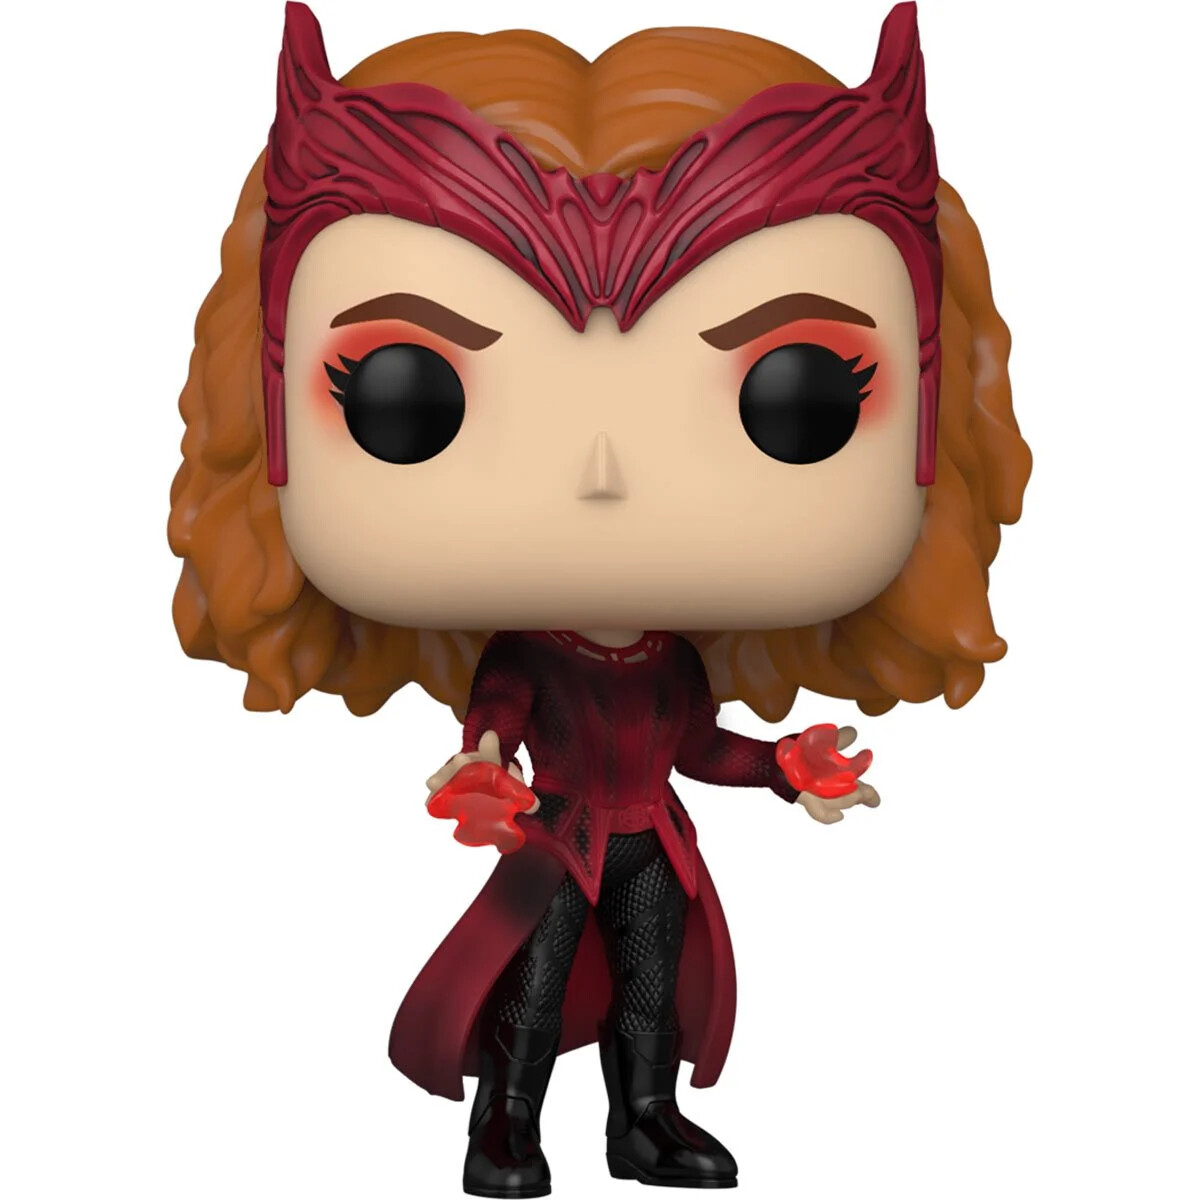 PRE-ORDER Doctor Strange in the Multiverse of Madness - Scarlet Witch Pop! Vinyl Figure - 3rd Batch